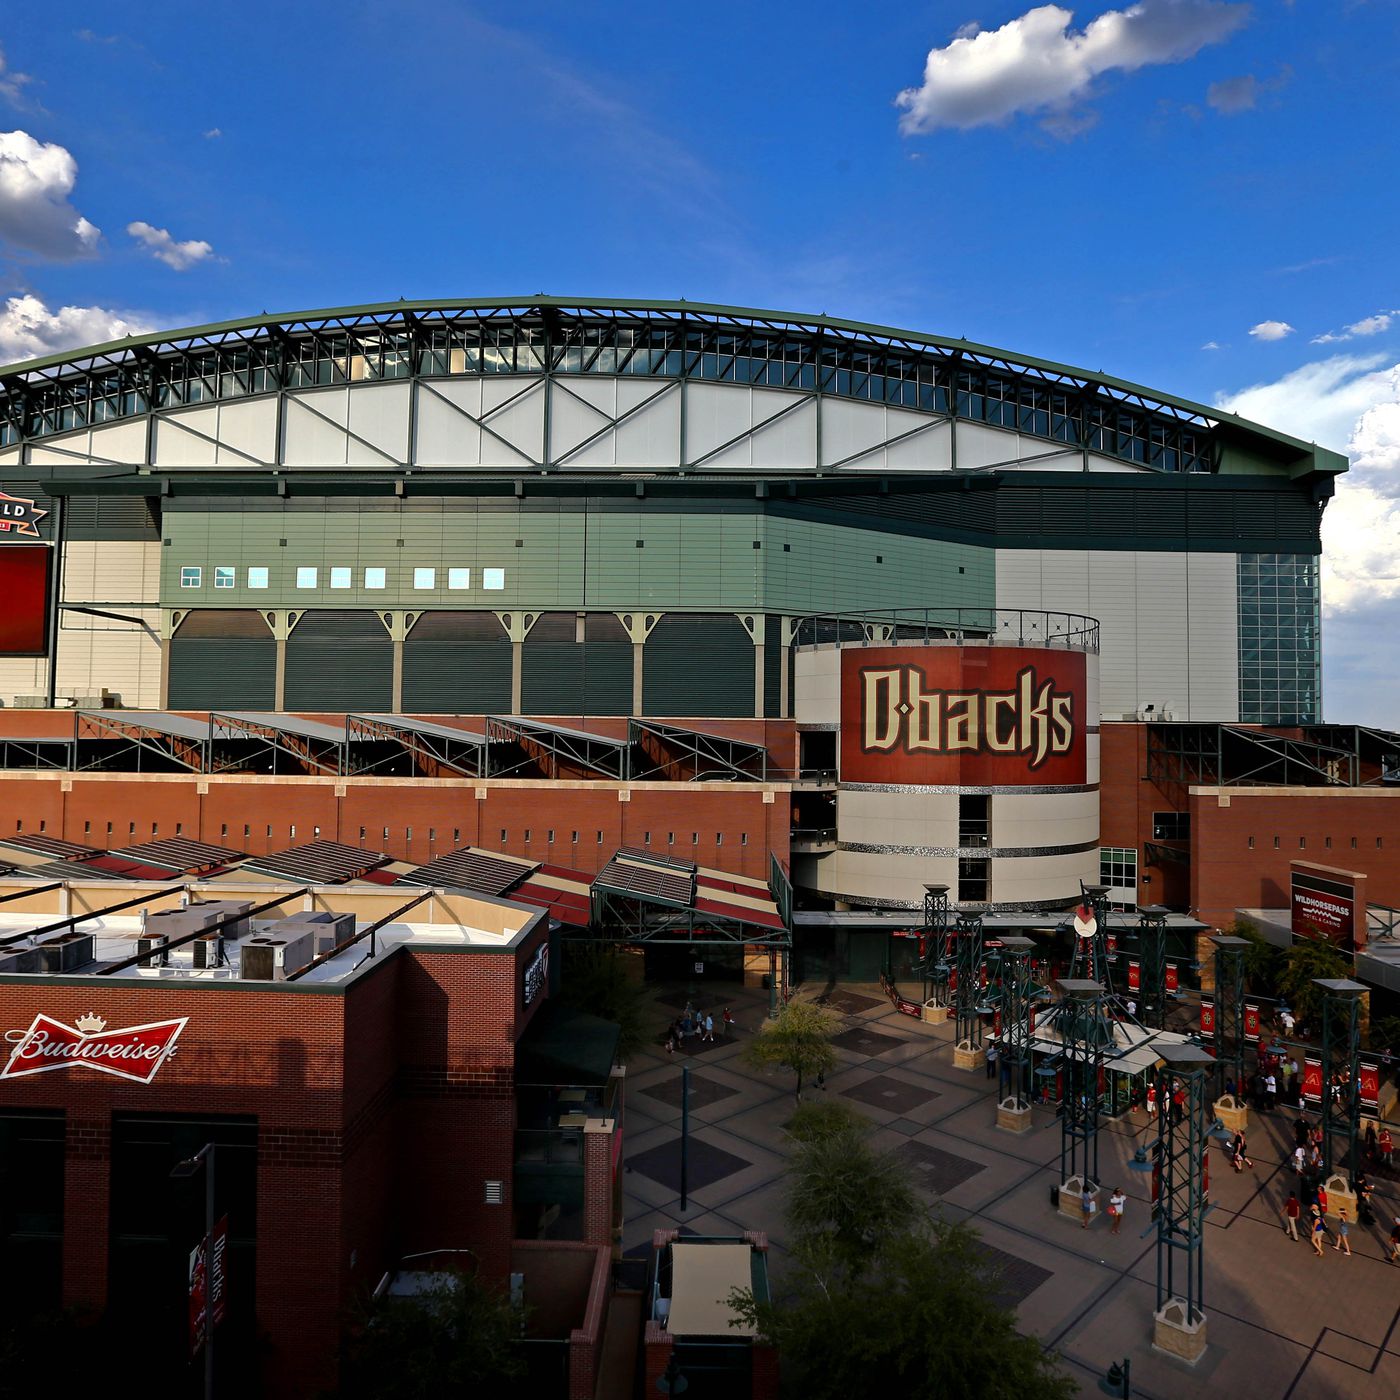 chase field outside